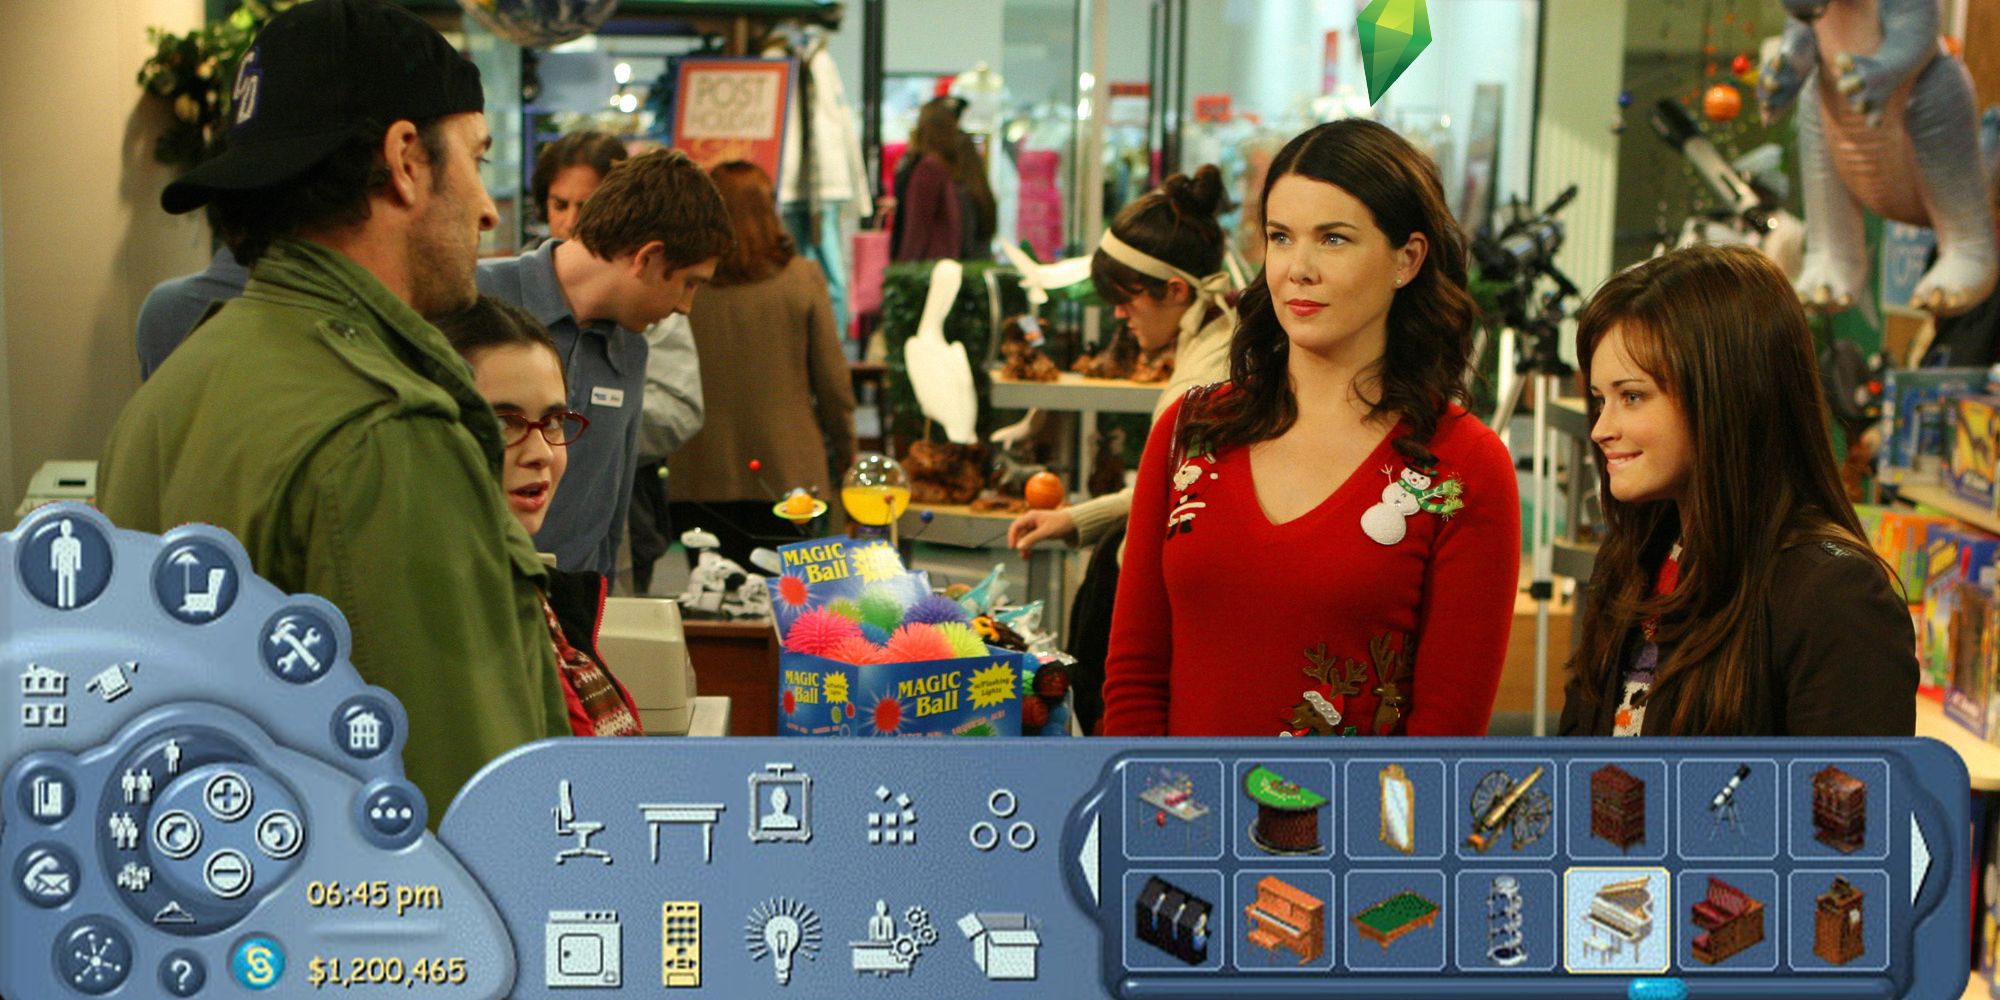 Luke, April, Lorelai, and Rory in a store with The Sims shopping interface superimposed over the bottom of the image.